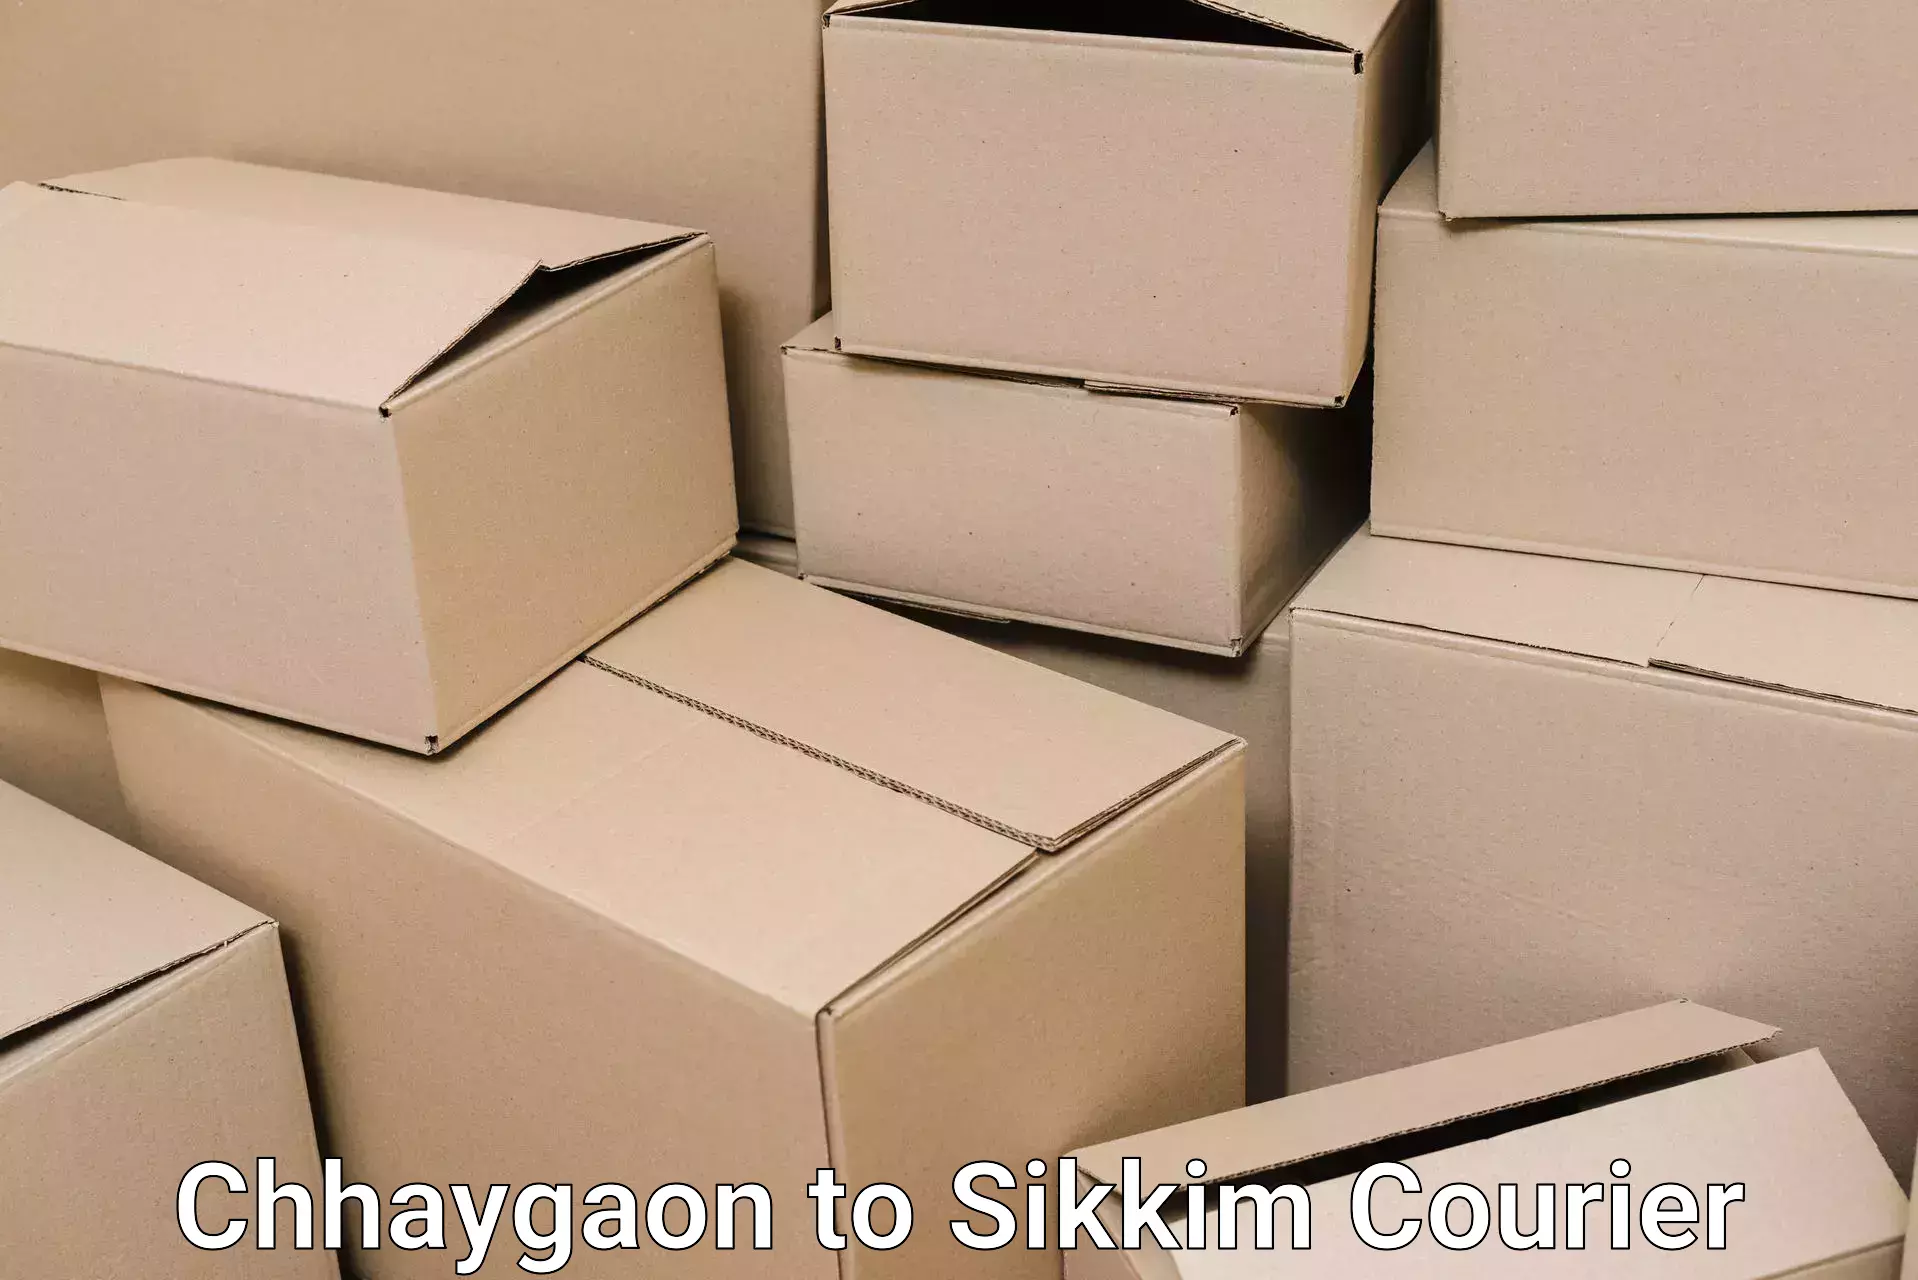 Efficient packing and moving Chhaygaon to Sikkim